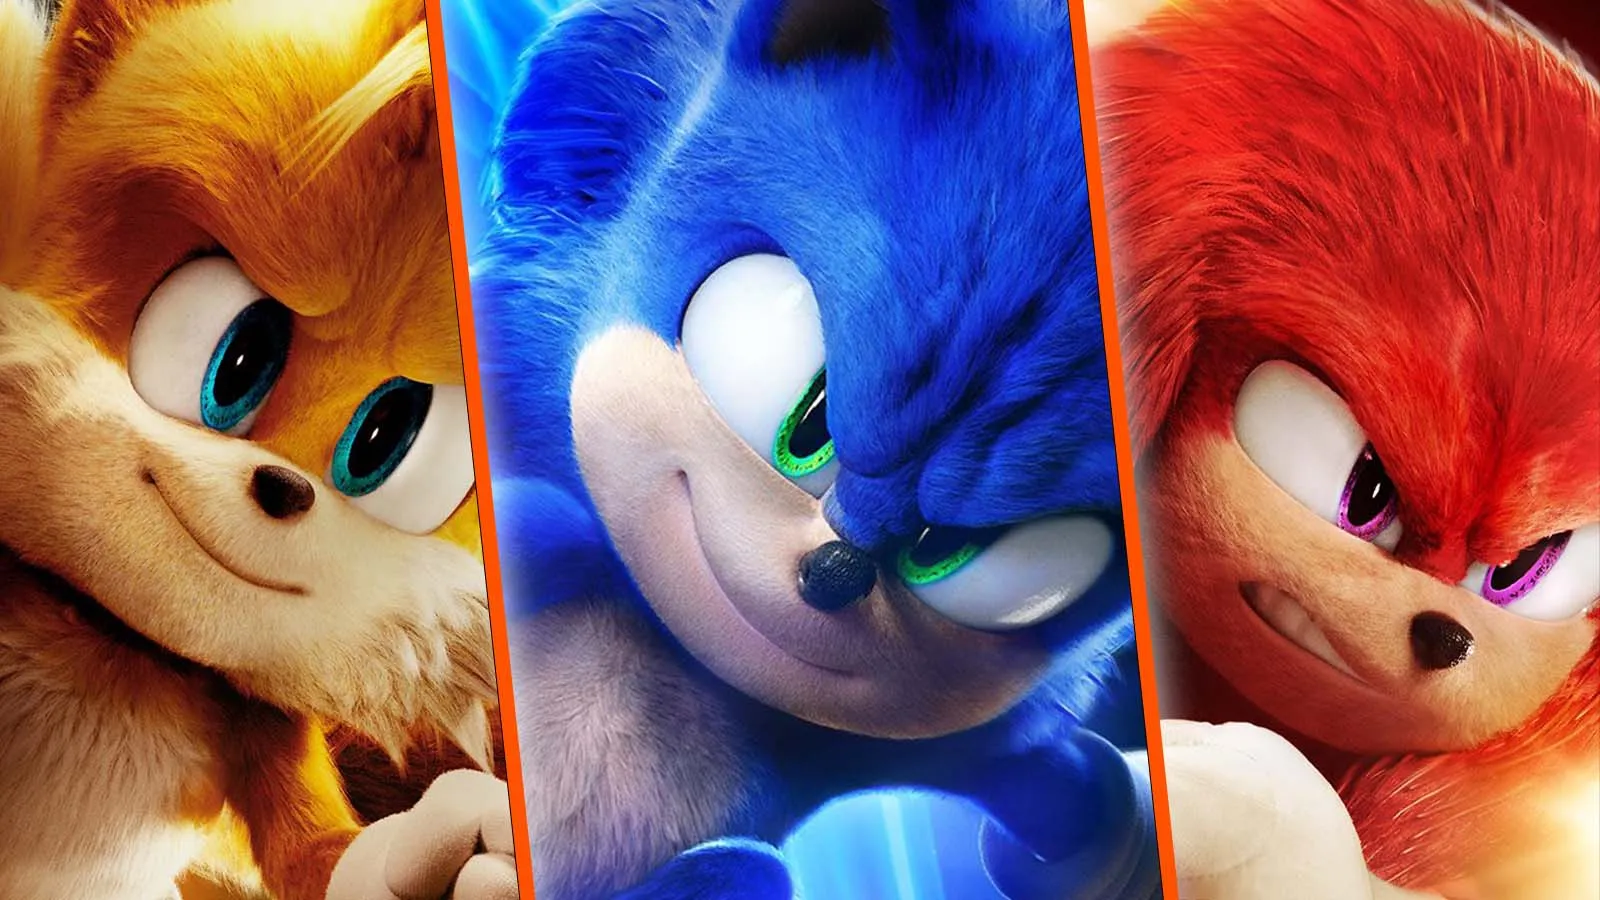 Sonic the Hedgehog 2 Movie sets massive box office records